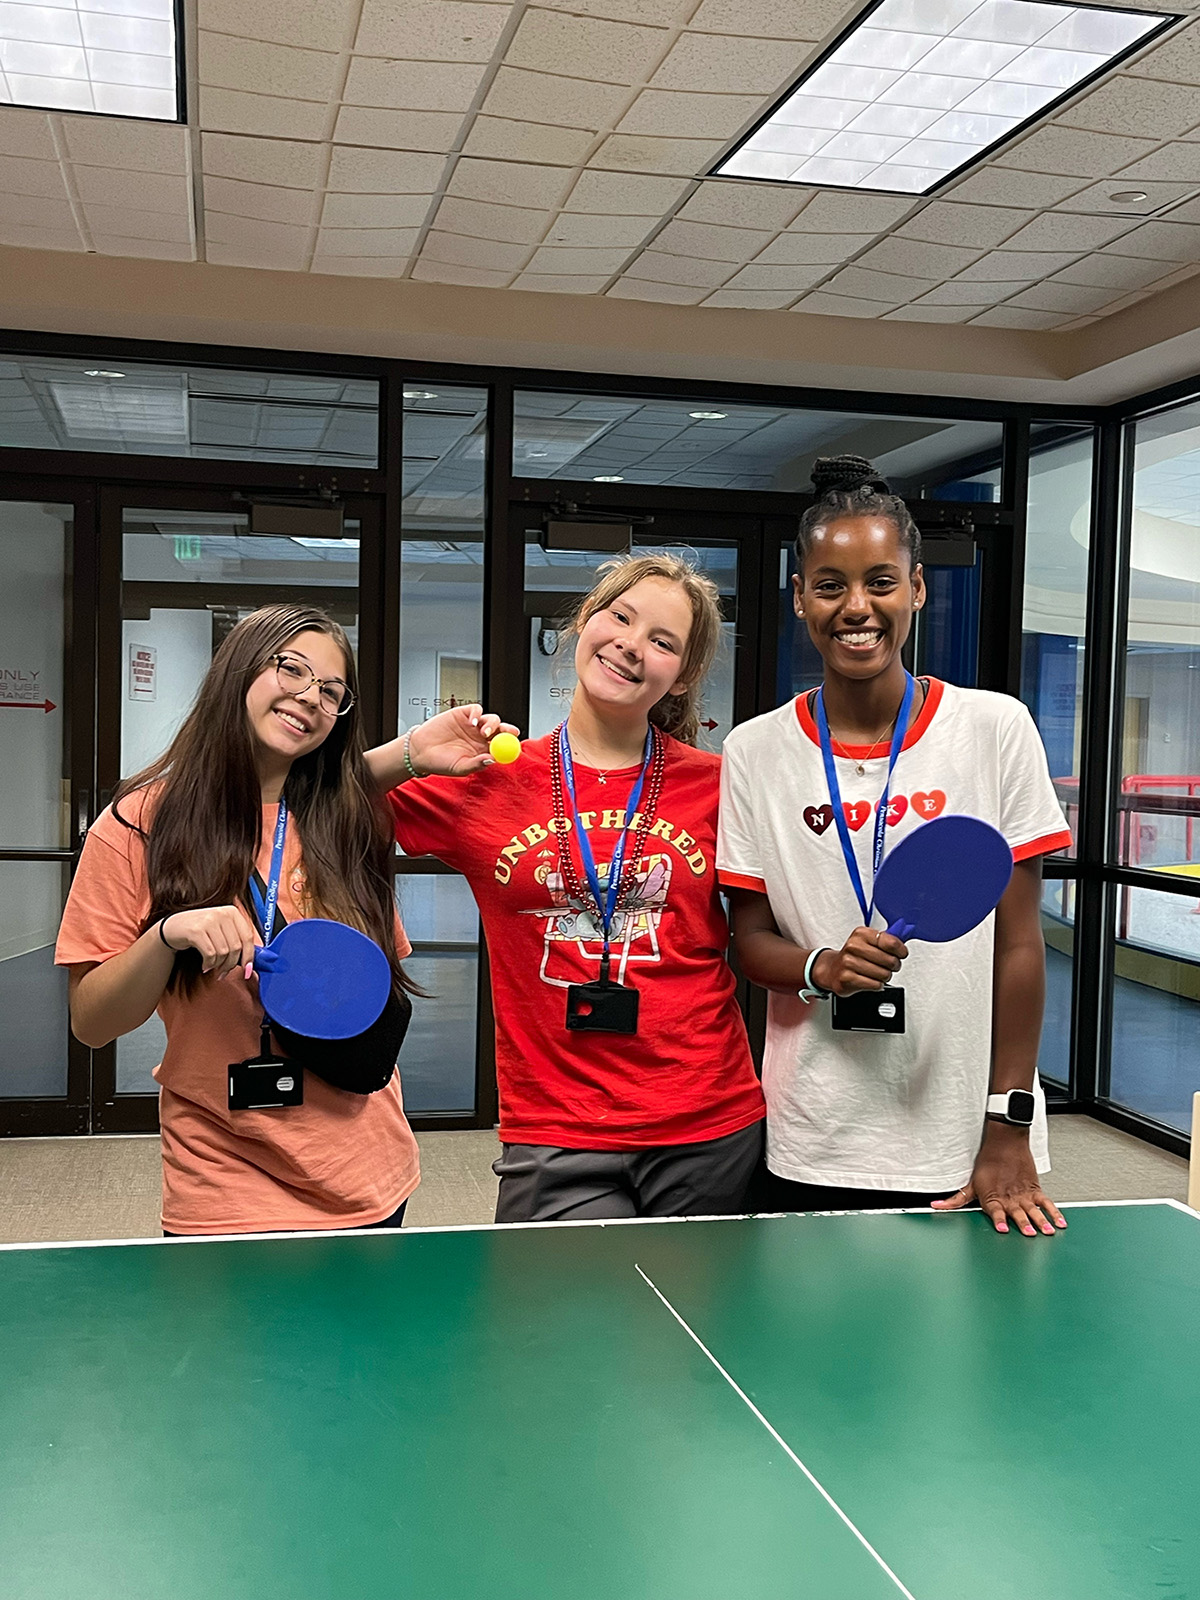 Teen Extreme girl campers playing ping pong